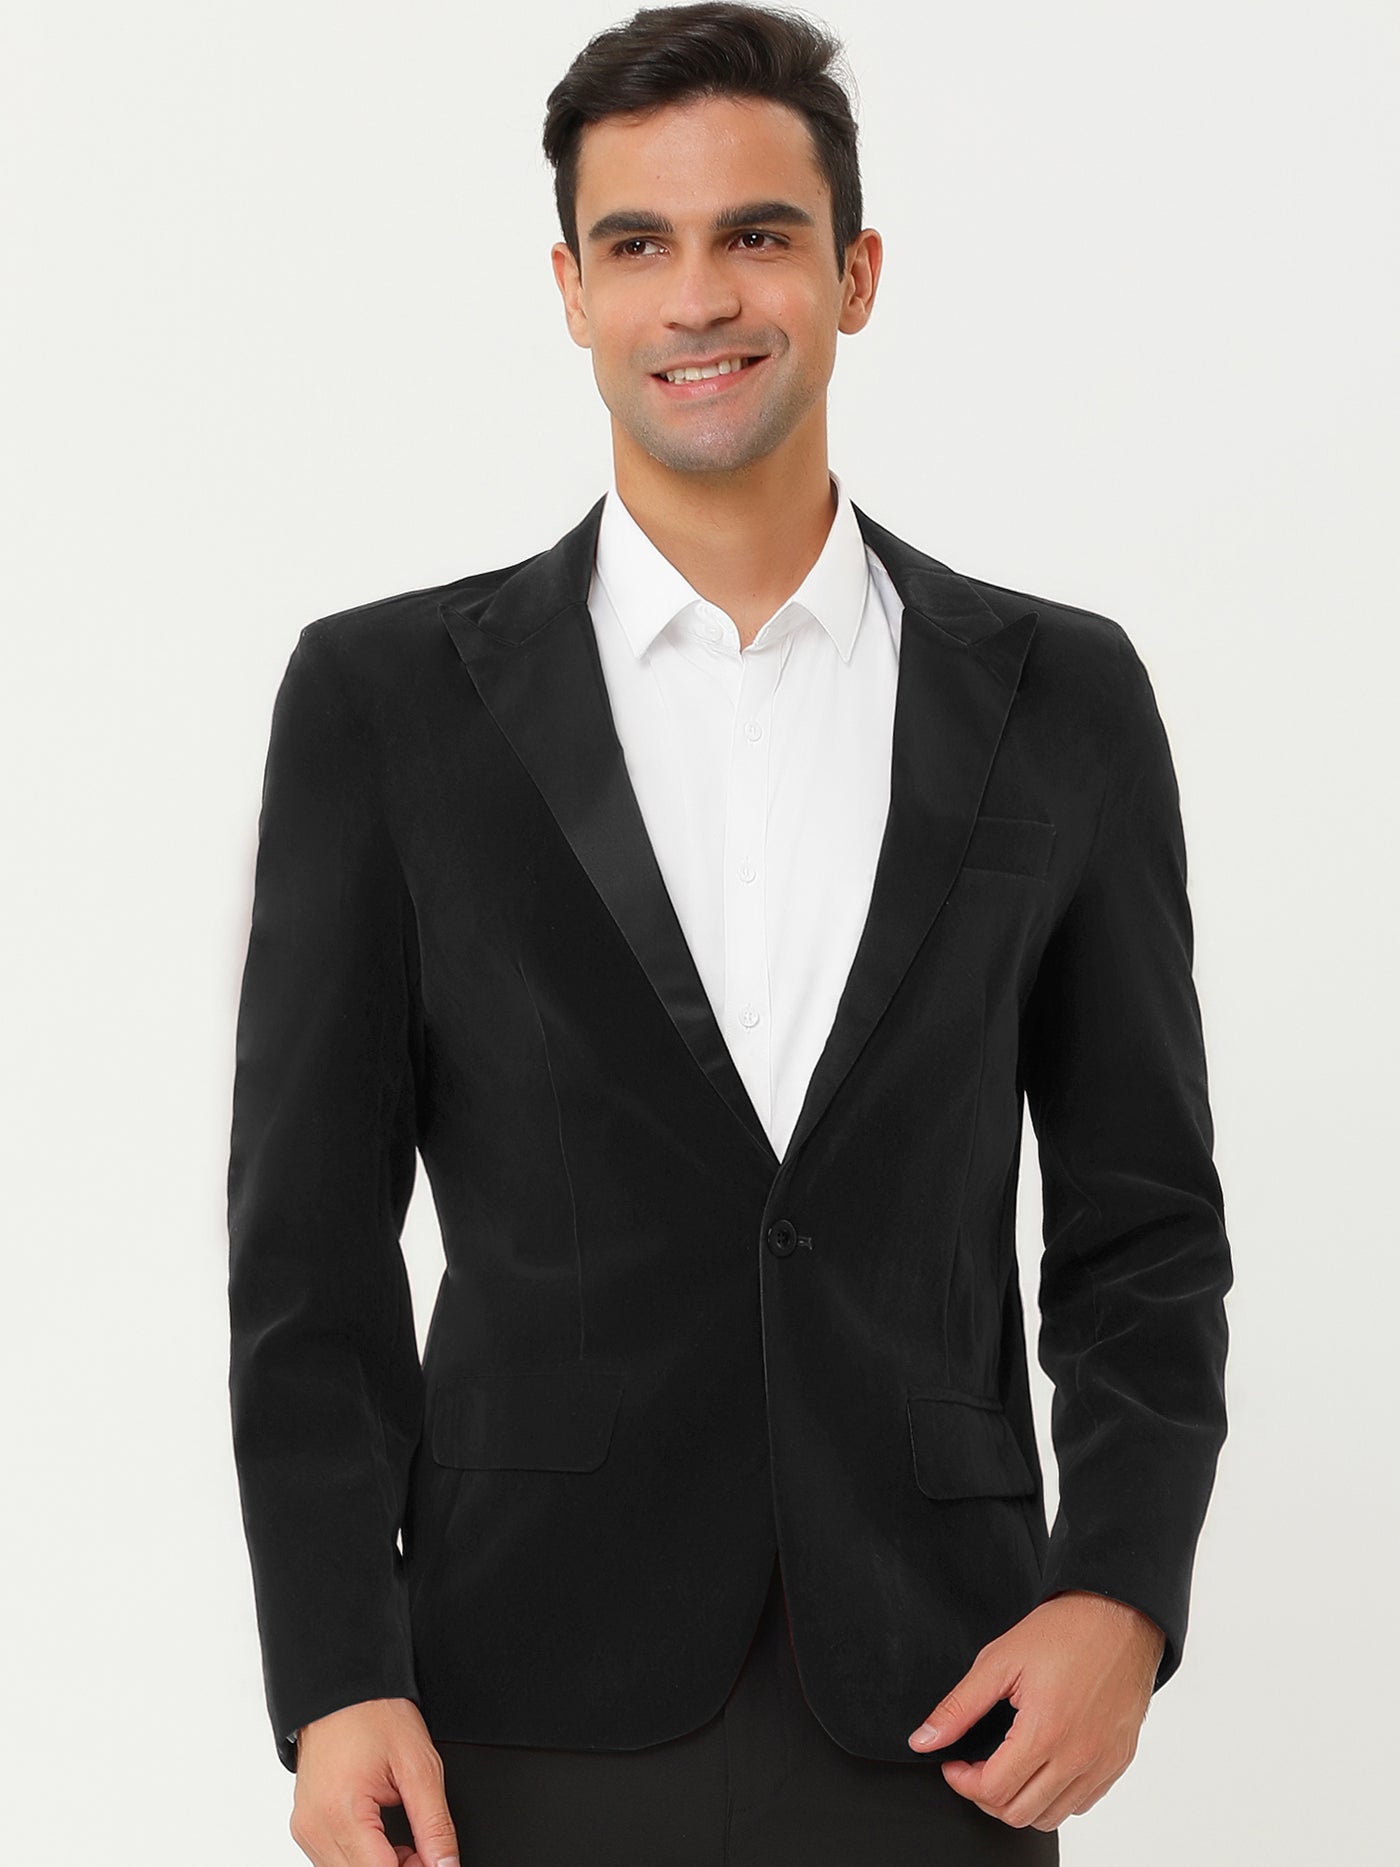 Bublédon Mr. Football Style Chic Velvet Solid One Button Party Prom Suit Blazer